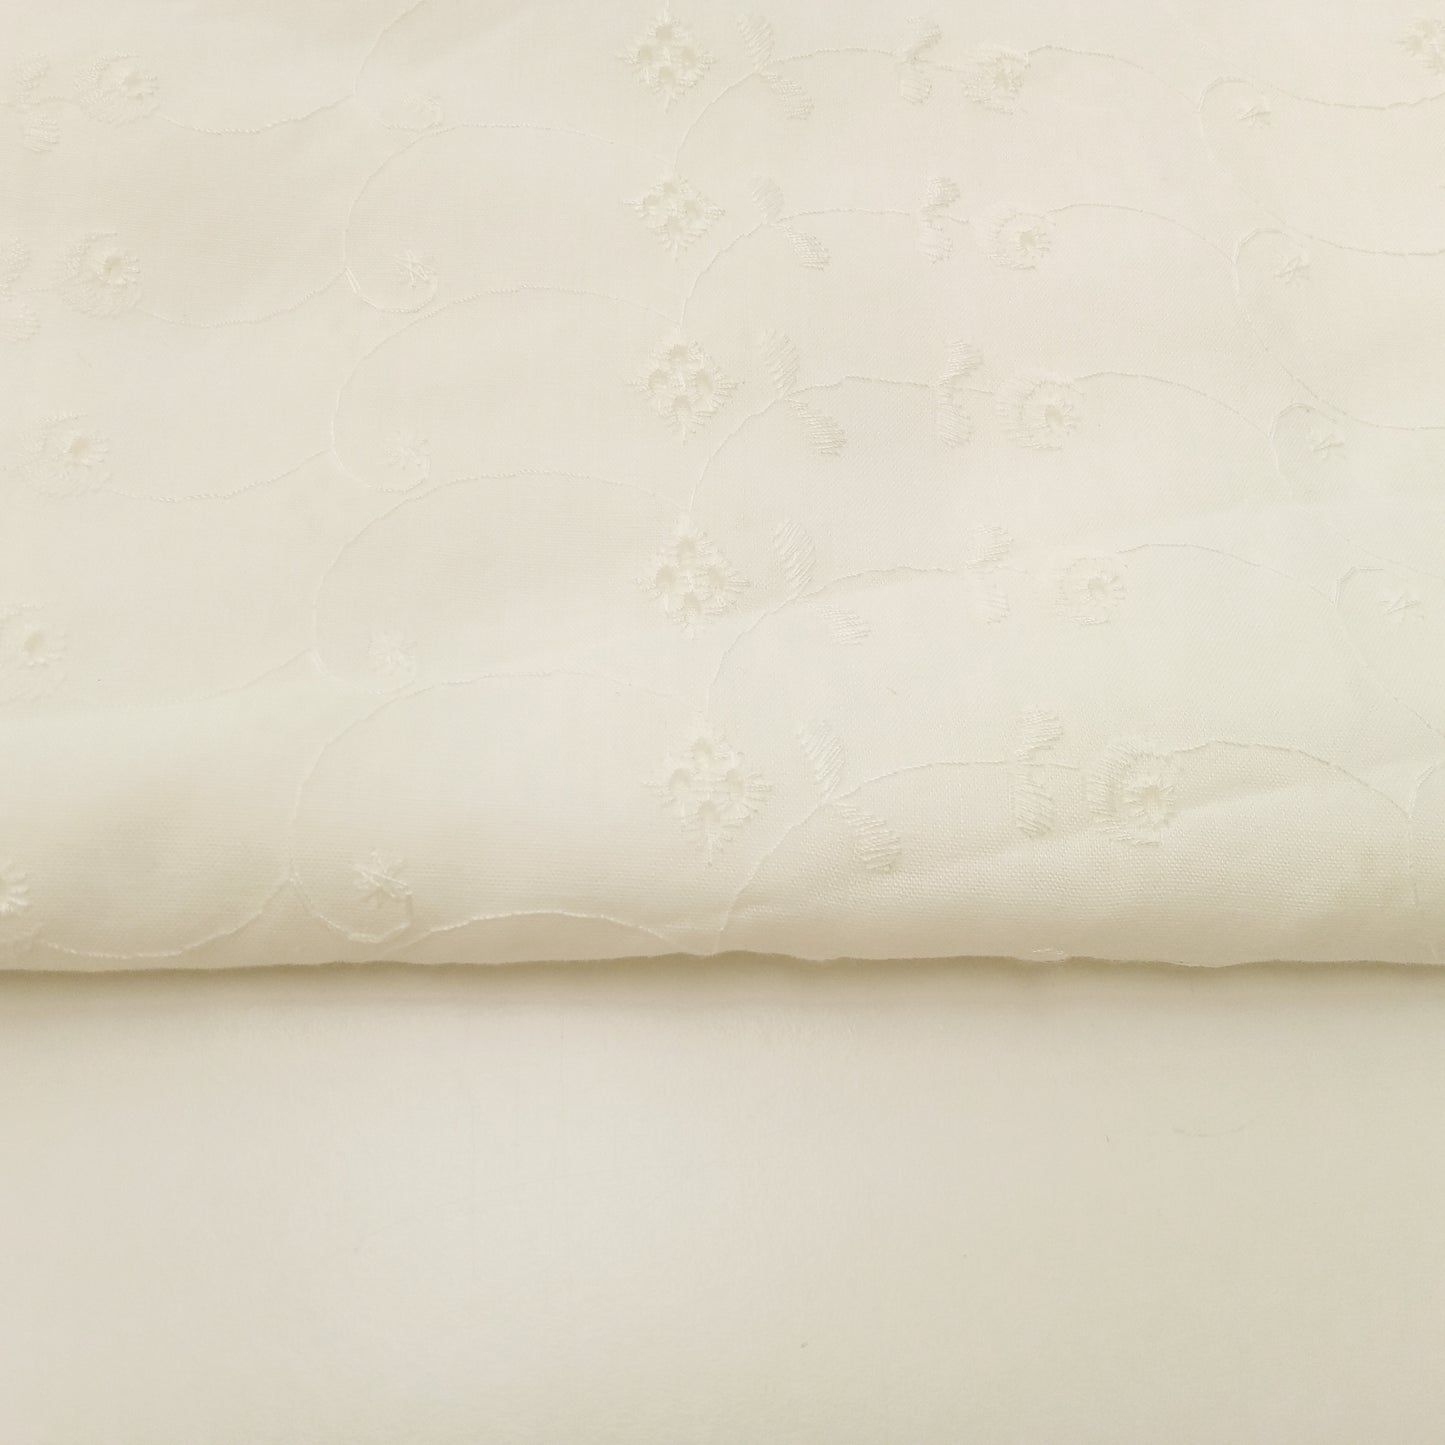 Briodery Anglaise cotton - cream -2.40mtrs